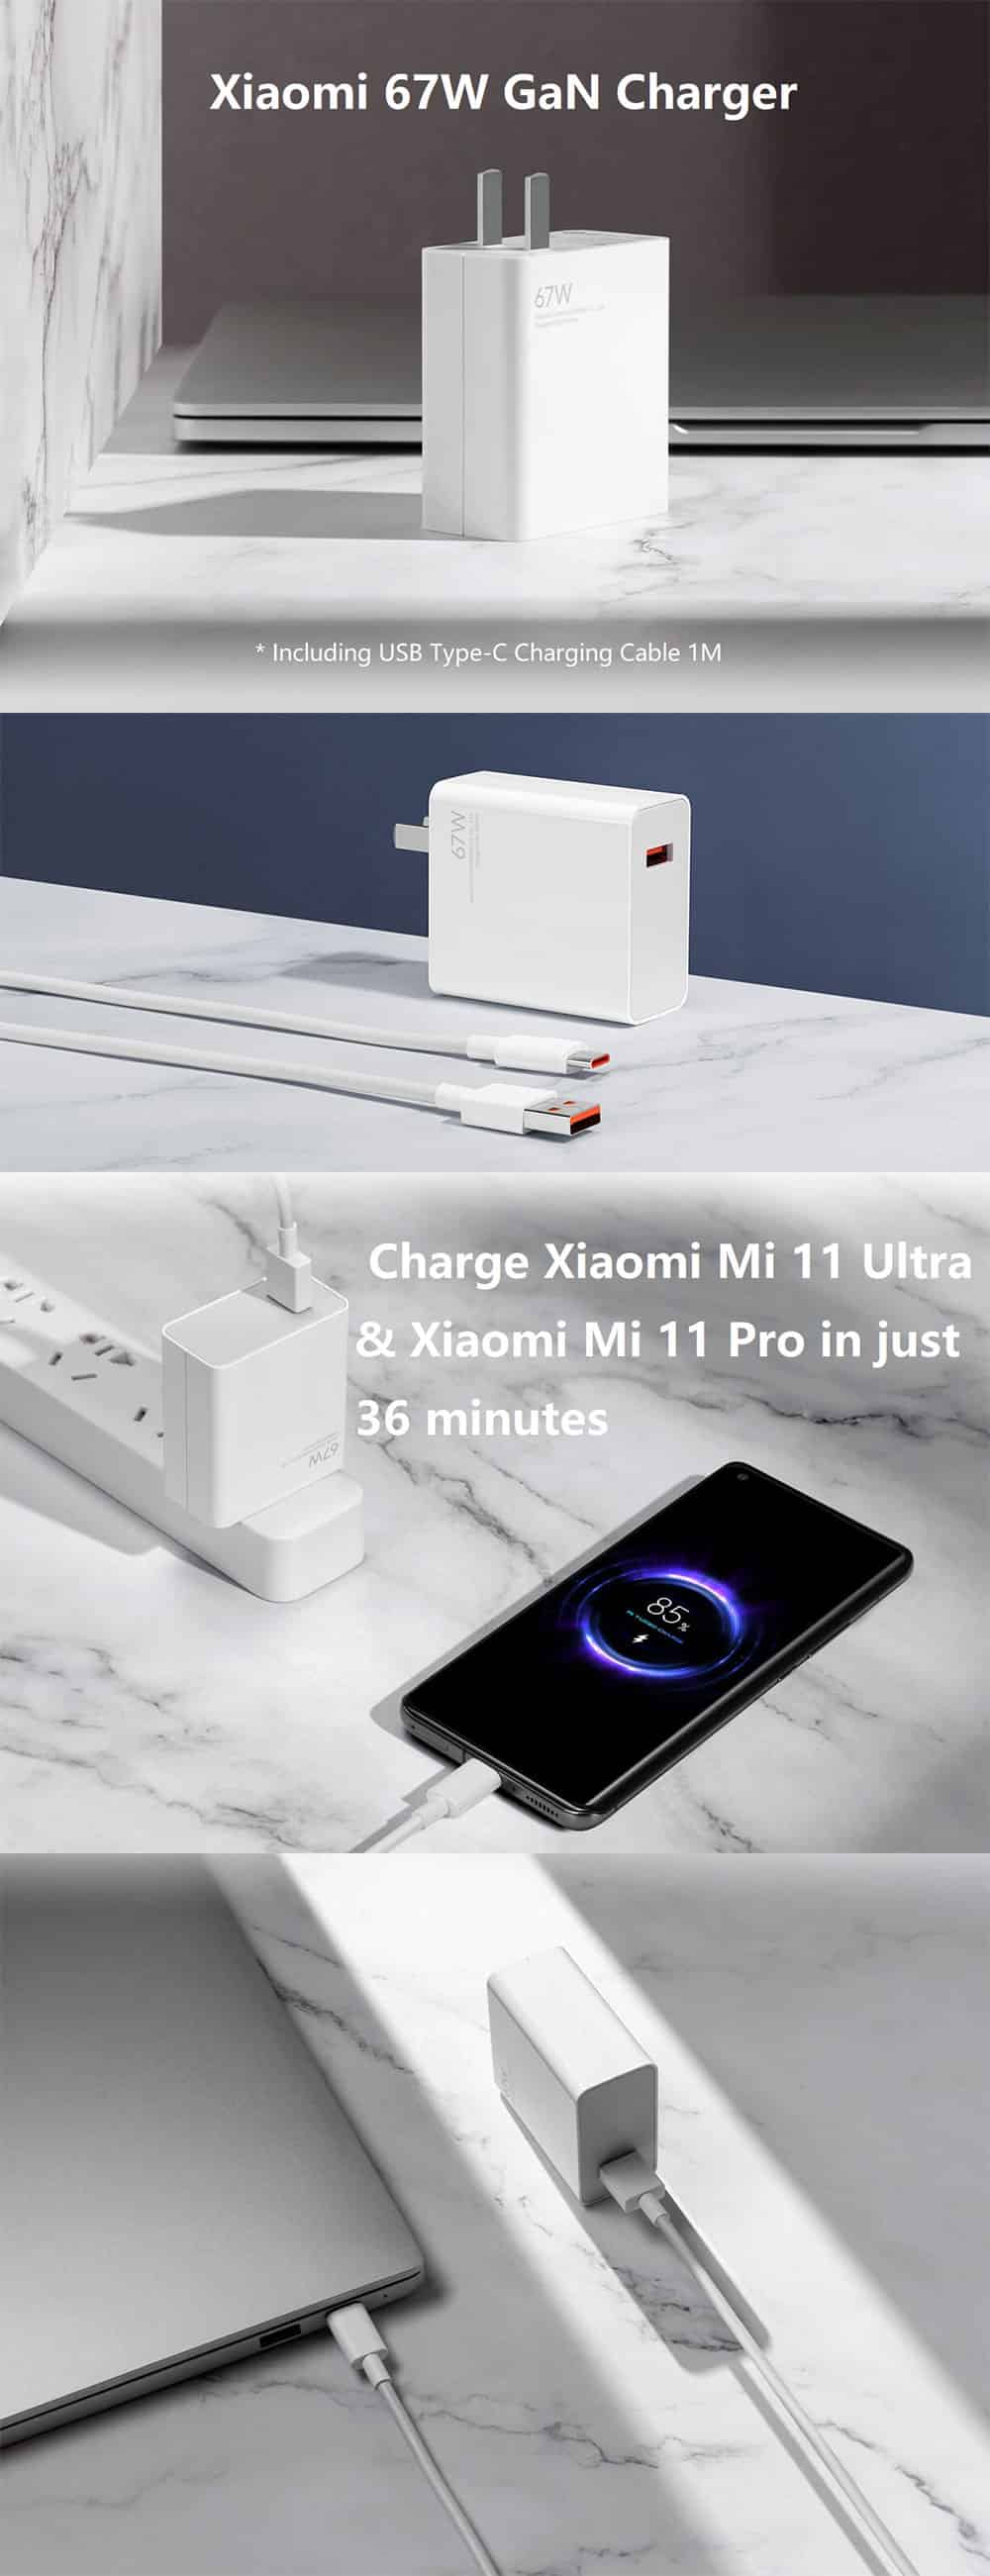 Xiaomi 67W GaN Charger with USB C Cable 3